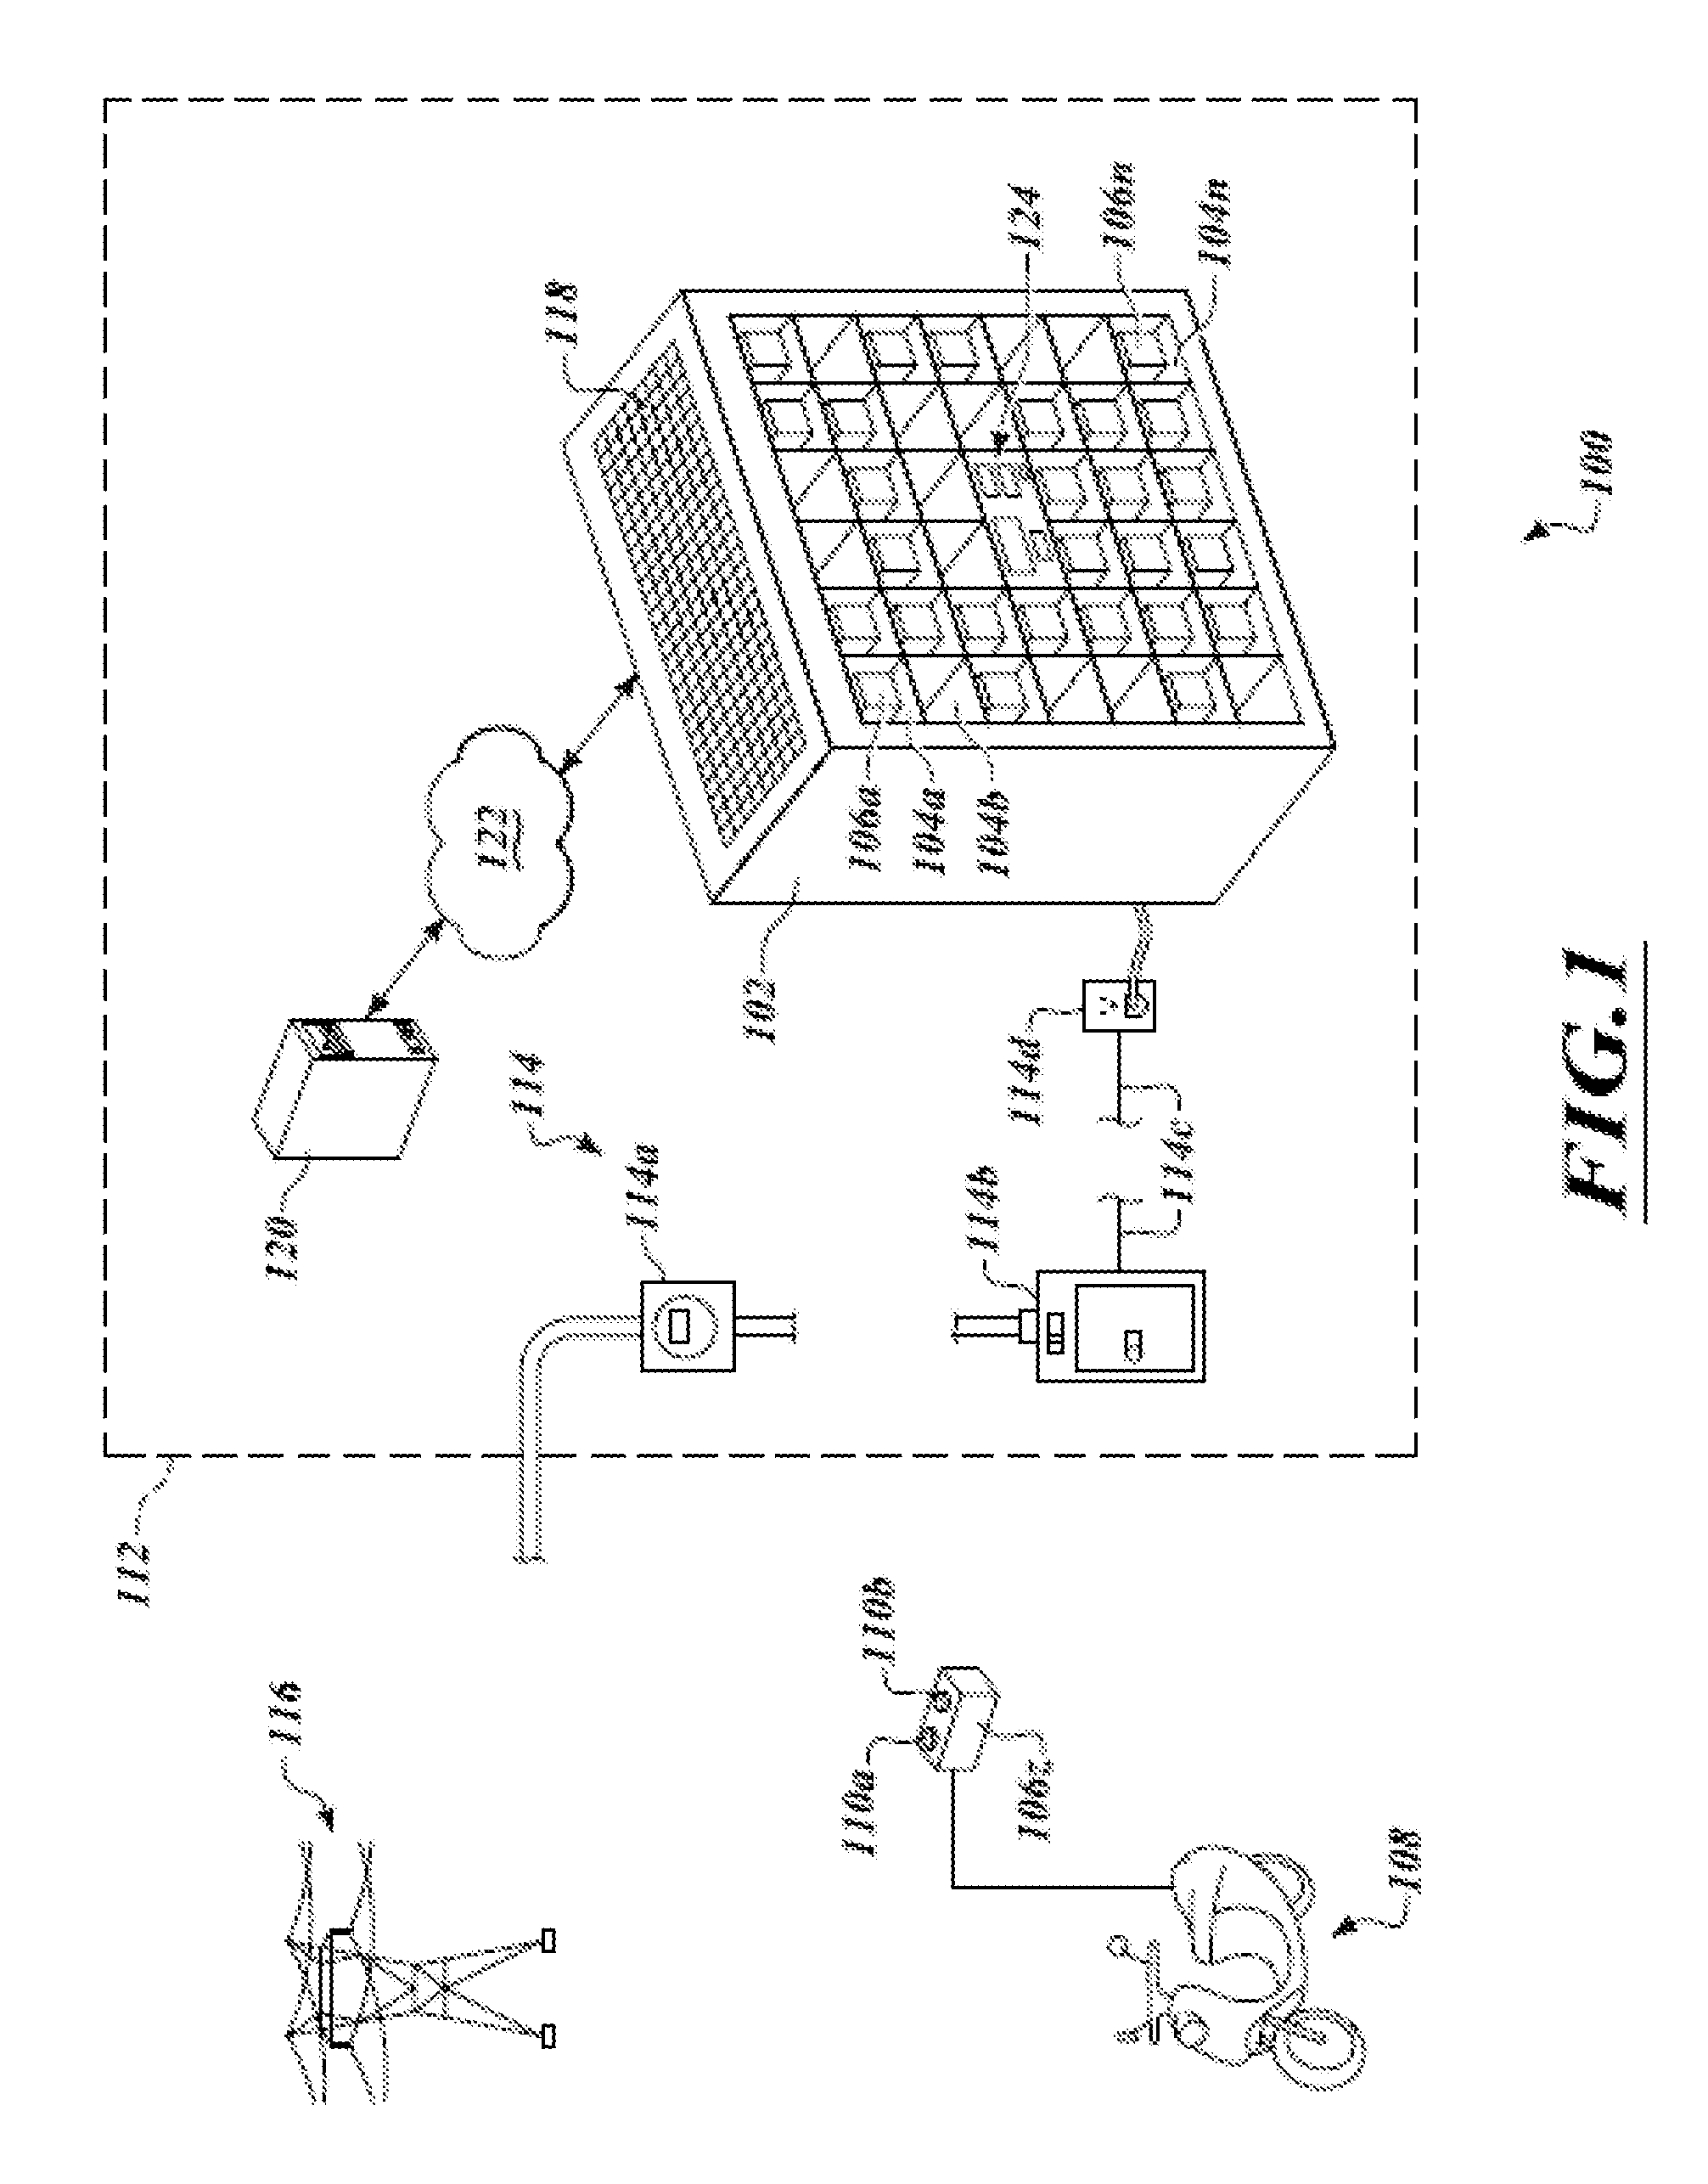 Apparatus, method and article for reserving power storage devices at reserving power storage device collection, charging and distribution machines